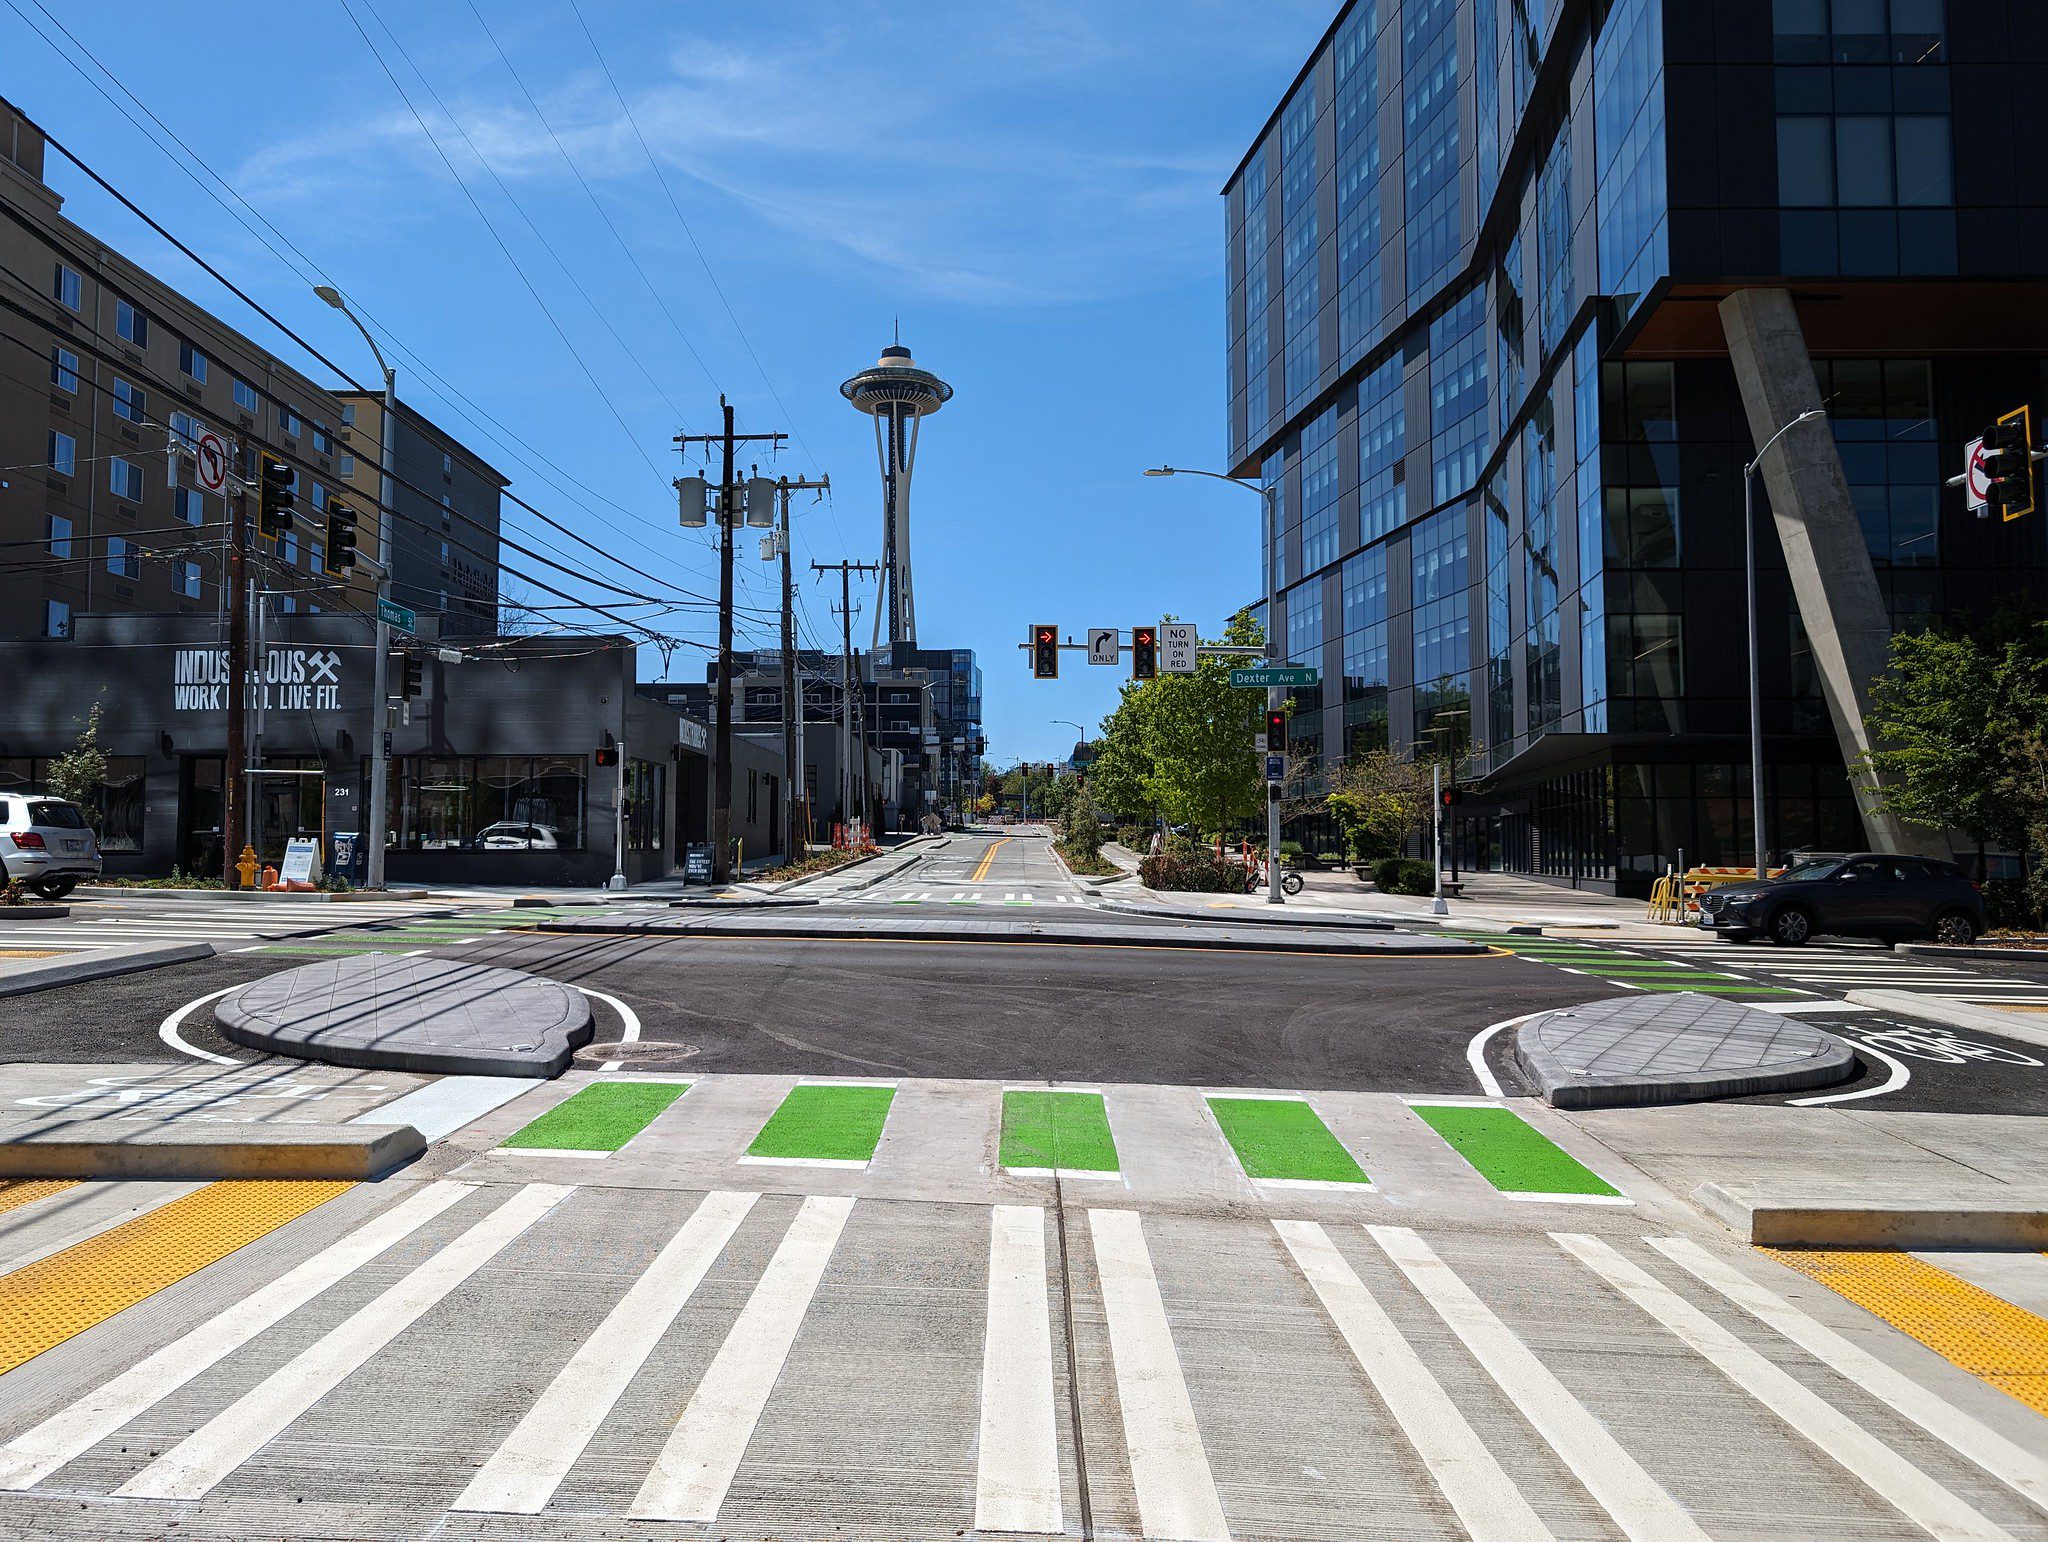 View of a crosswalk and bike path next to a street and large buildings with the Space Needle in the background.